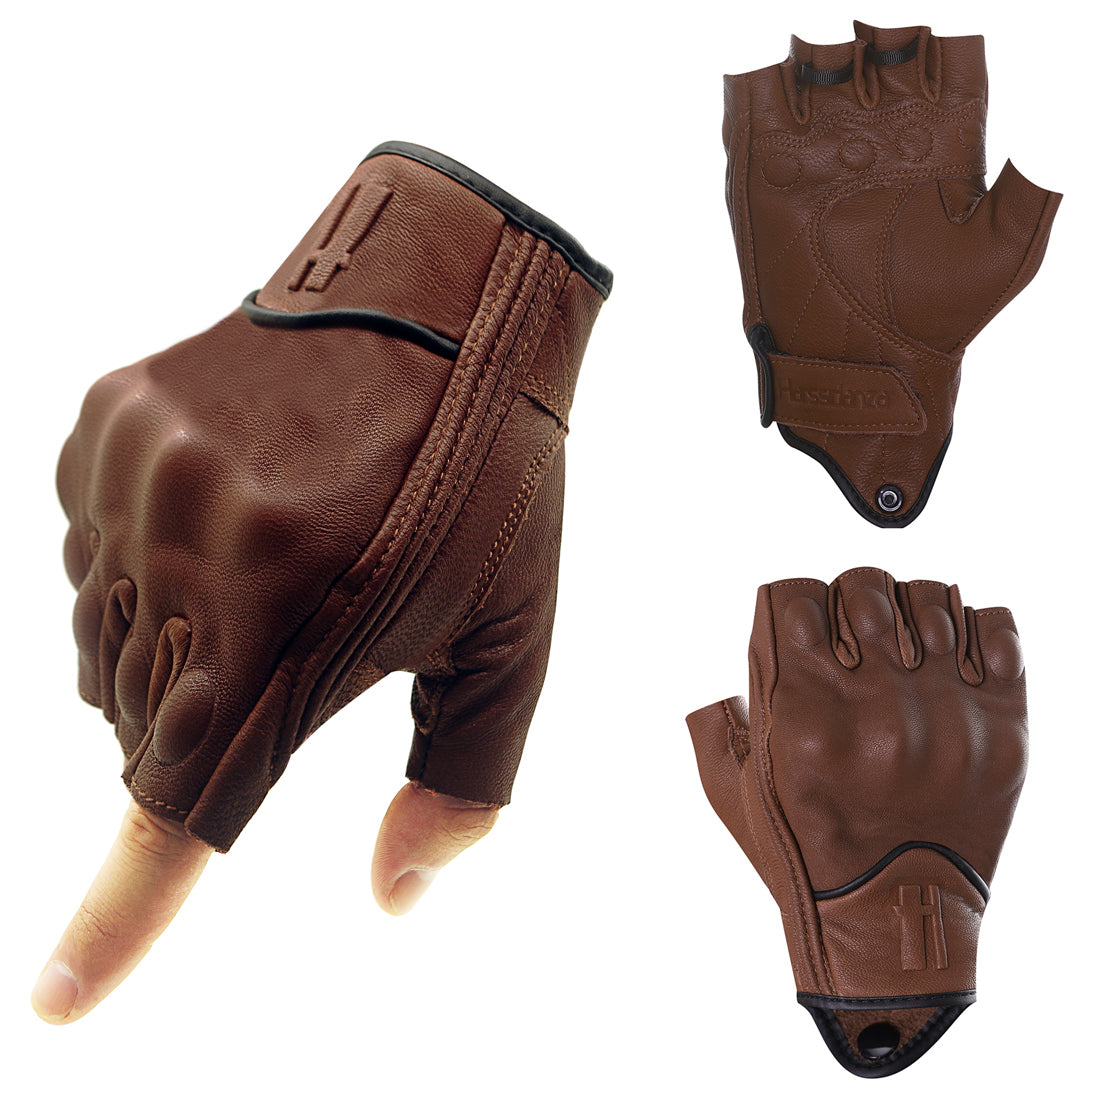 https://cdn.shopify.com/s/files/1/0343/6416/2093/products/Harssidanzar-Fingerless-Motorcycle-Gloves_for-Mens-Leather-Riding-Driving-gloves-with-Hand-Knuckle-saddle-_8_1800x1800.jpg?v=1630030426